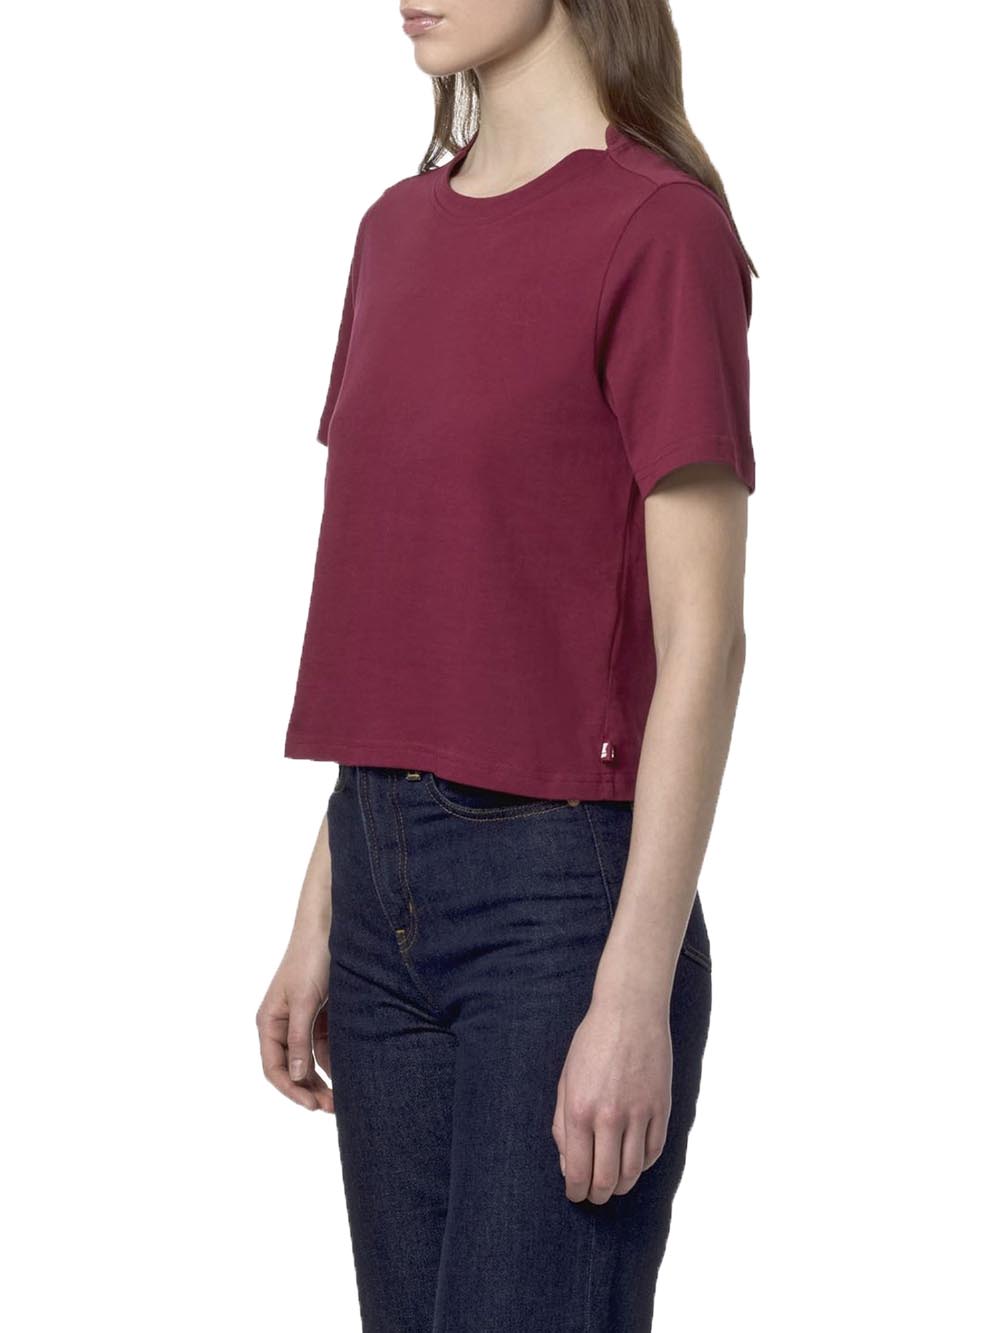 K-Way T-shirt Donna Rosso